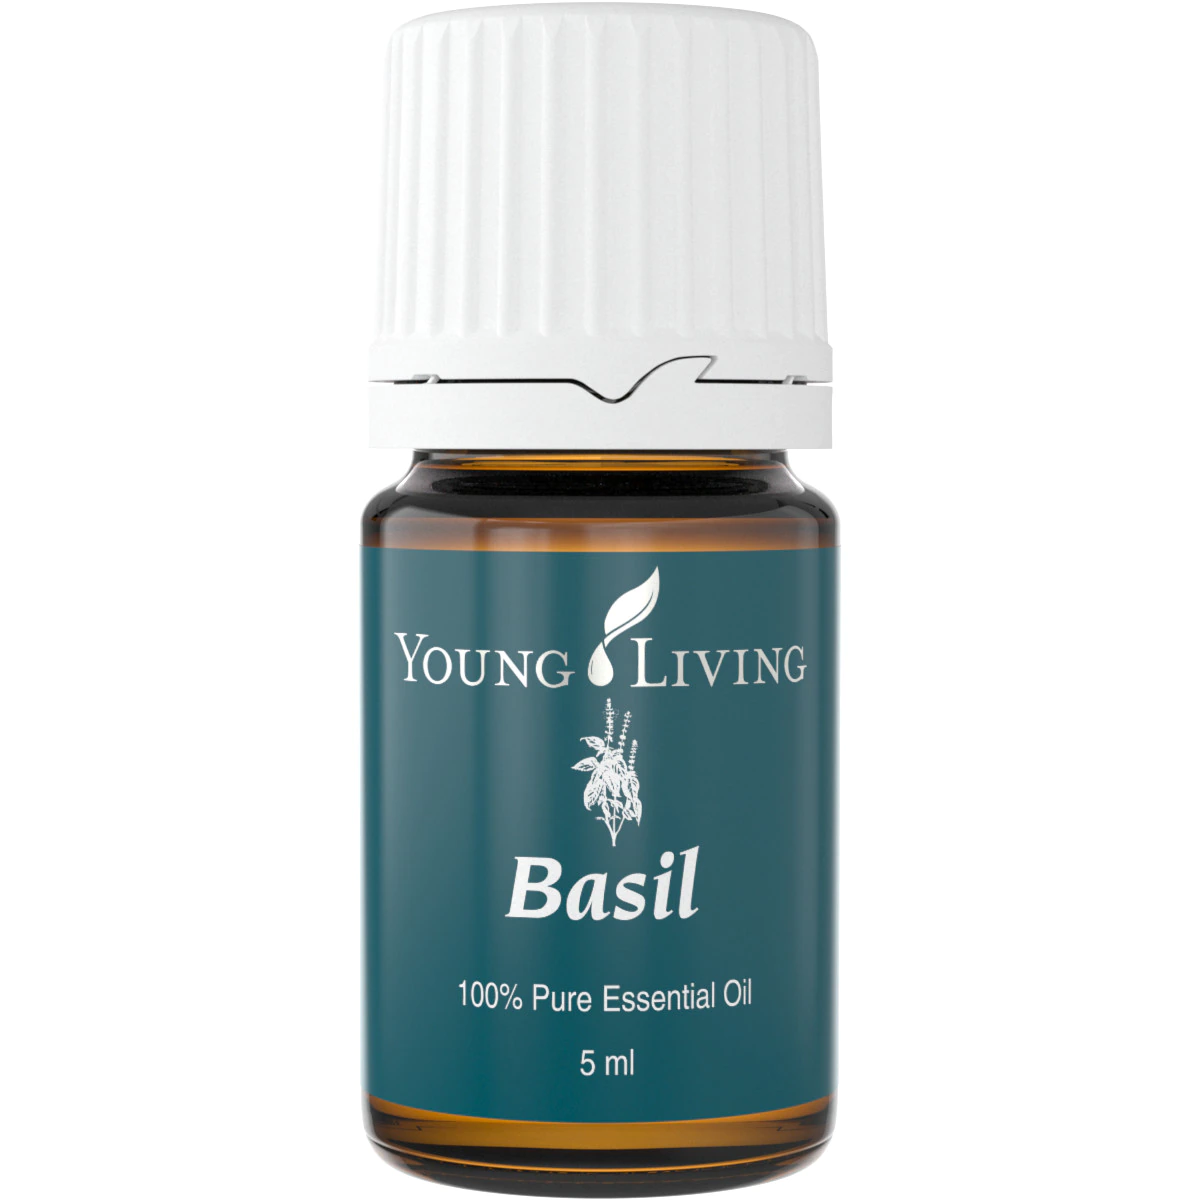 Ulei esential basil, 5ml, Young Living